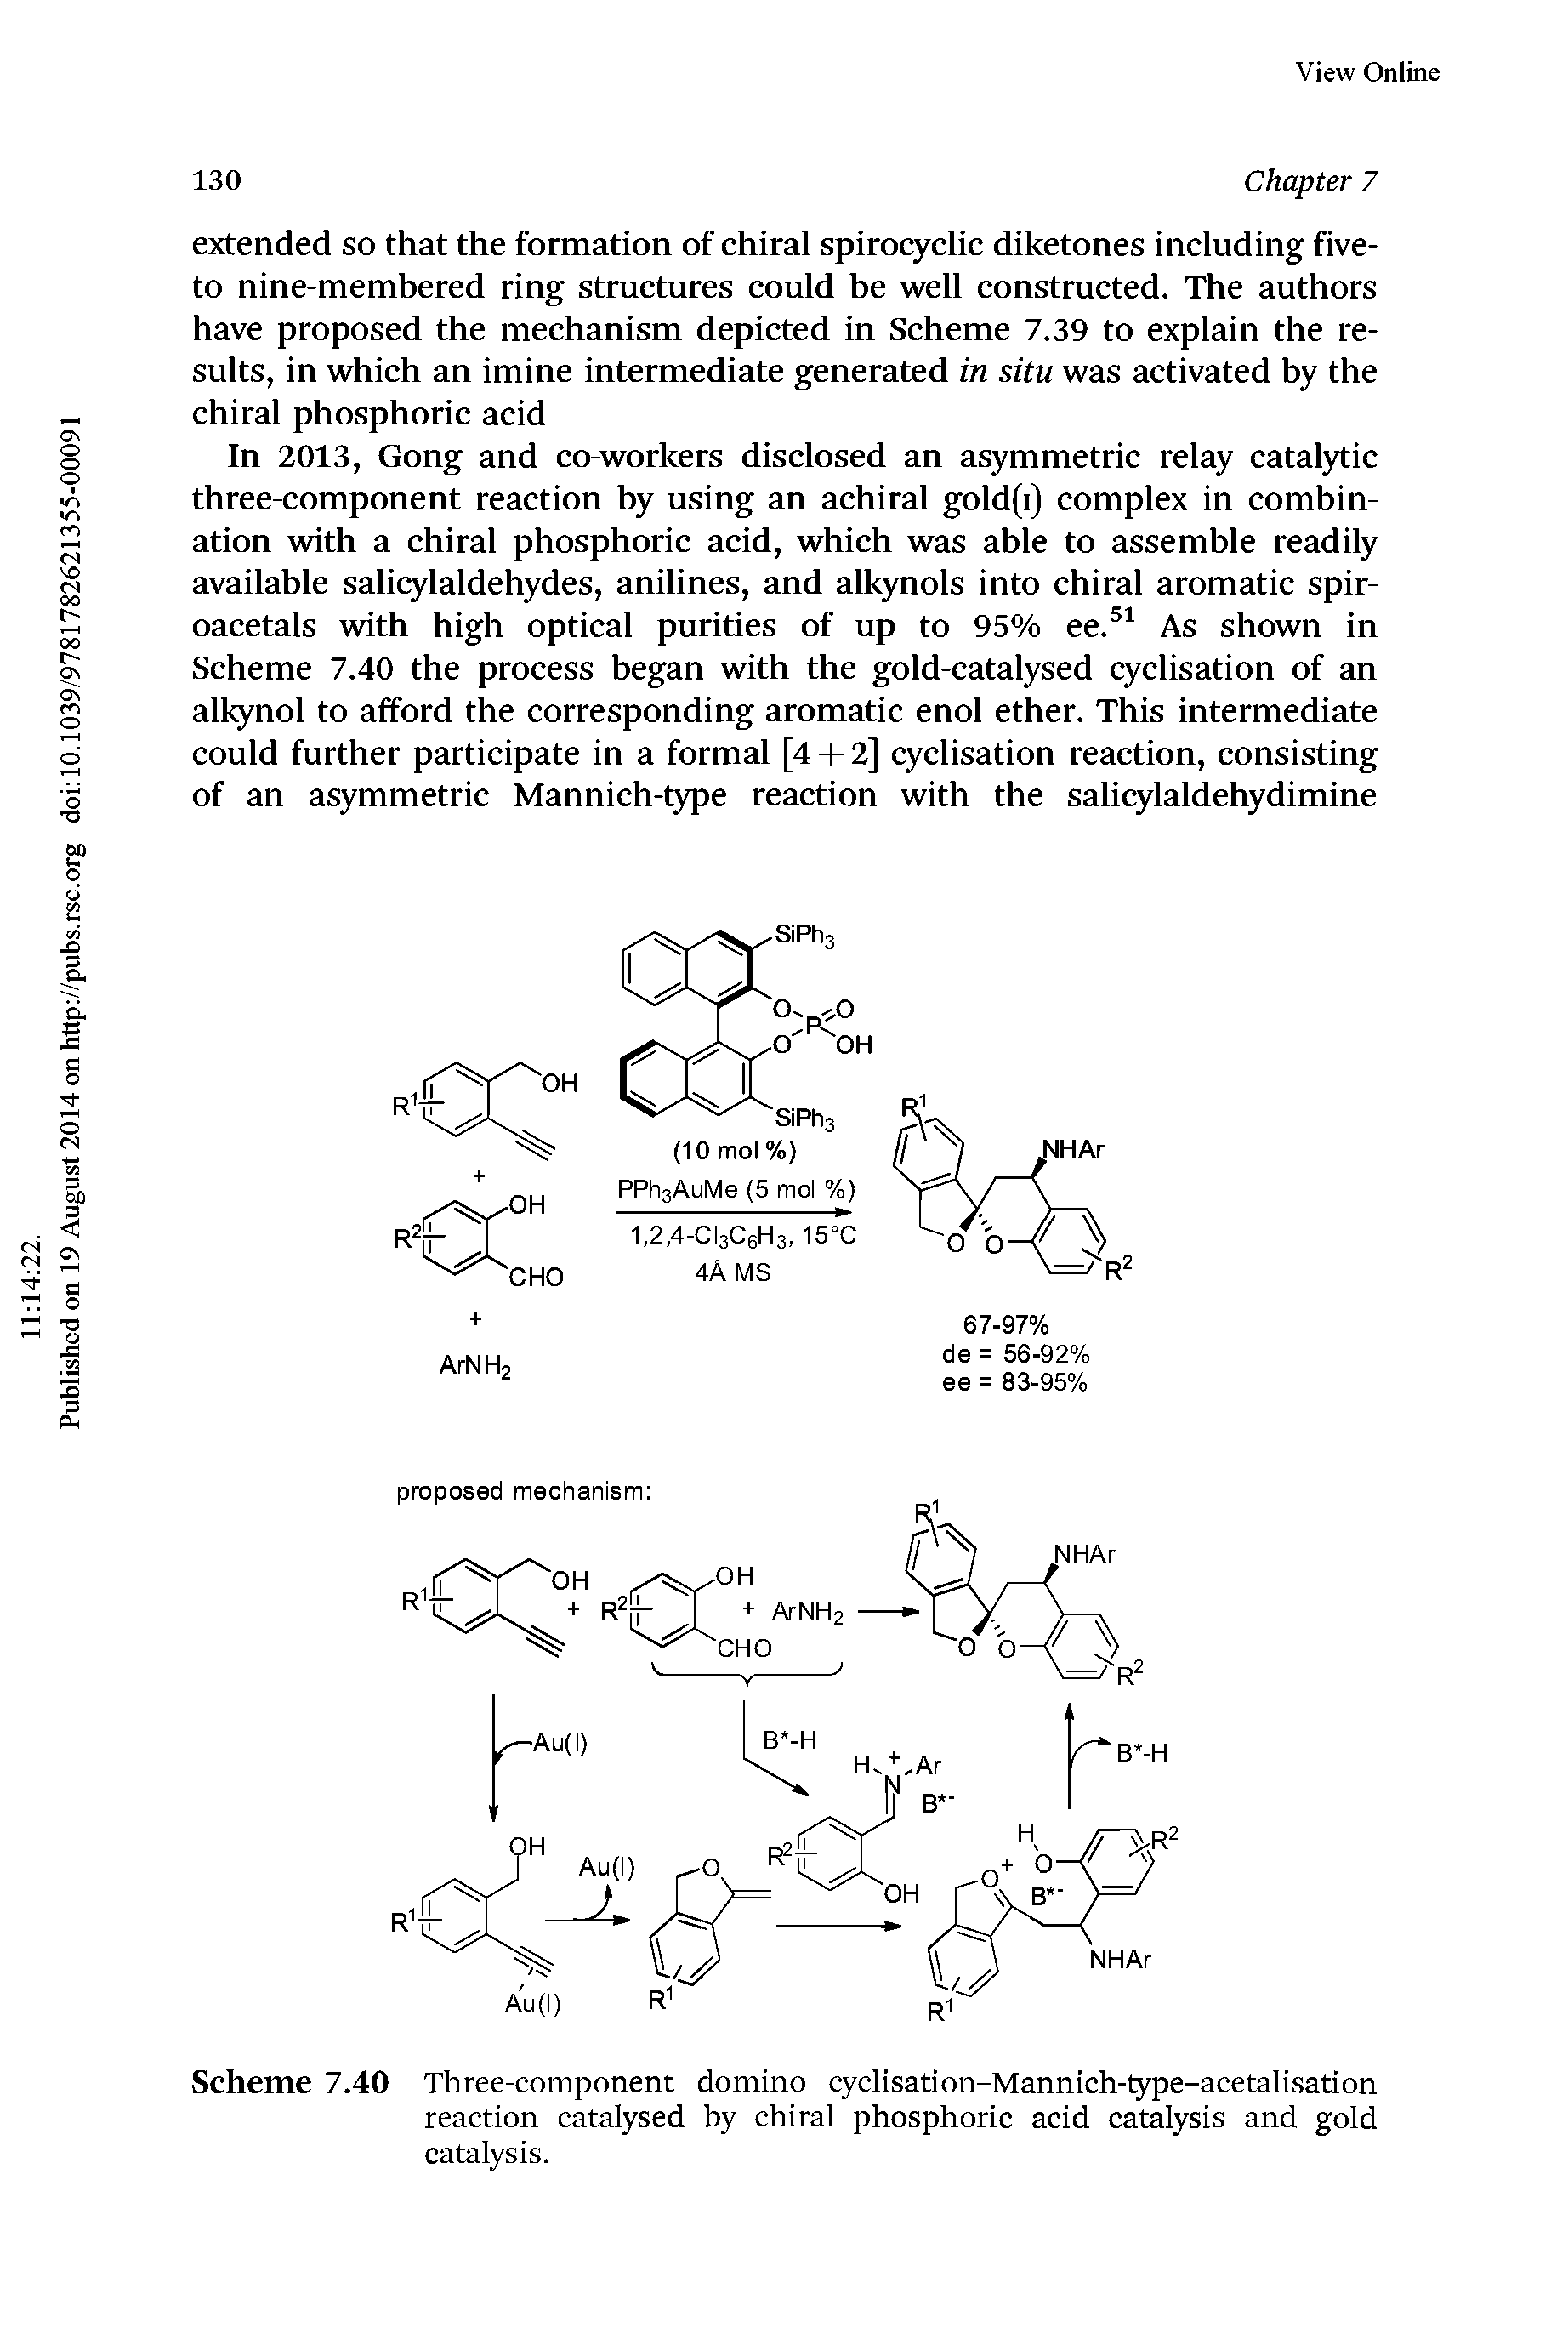 Scheme 7.40 Three-component domino cyclisation-Mannich-type-acetalisation reaction catalysed by chiral phosphoric acid catalysis and gold catalysis.